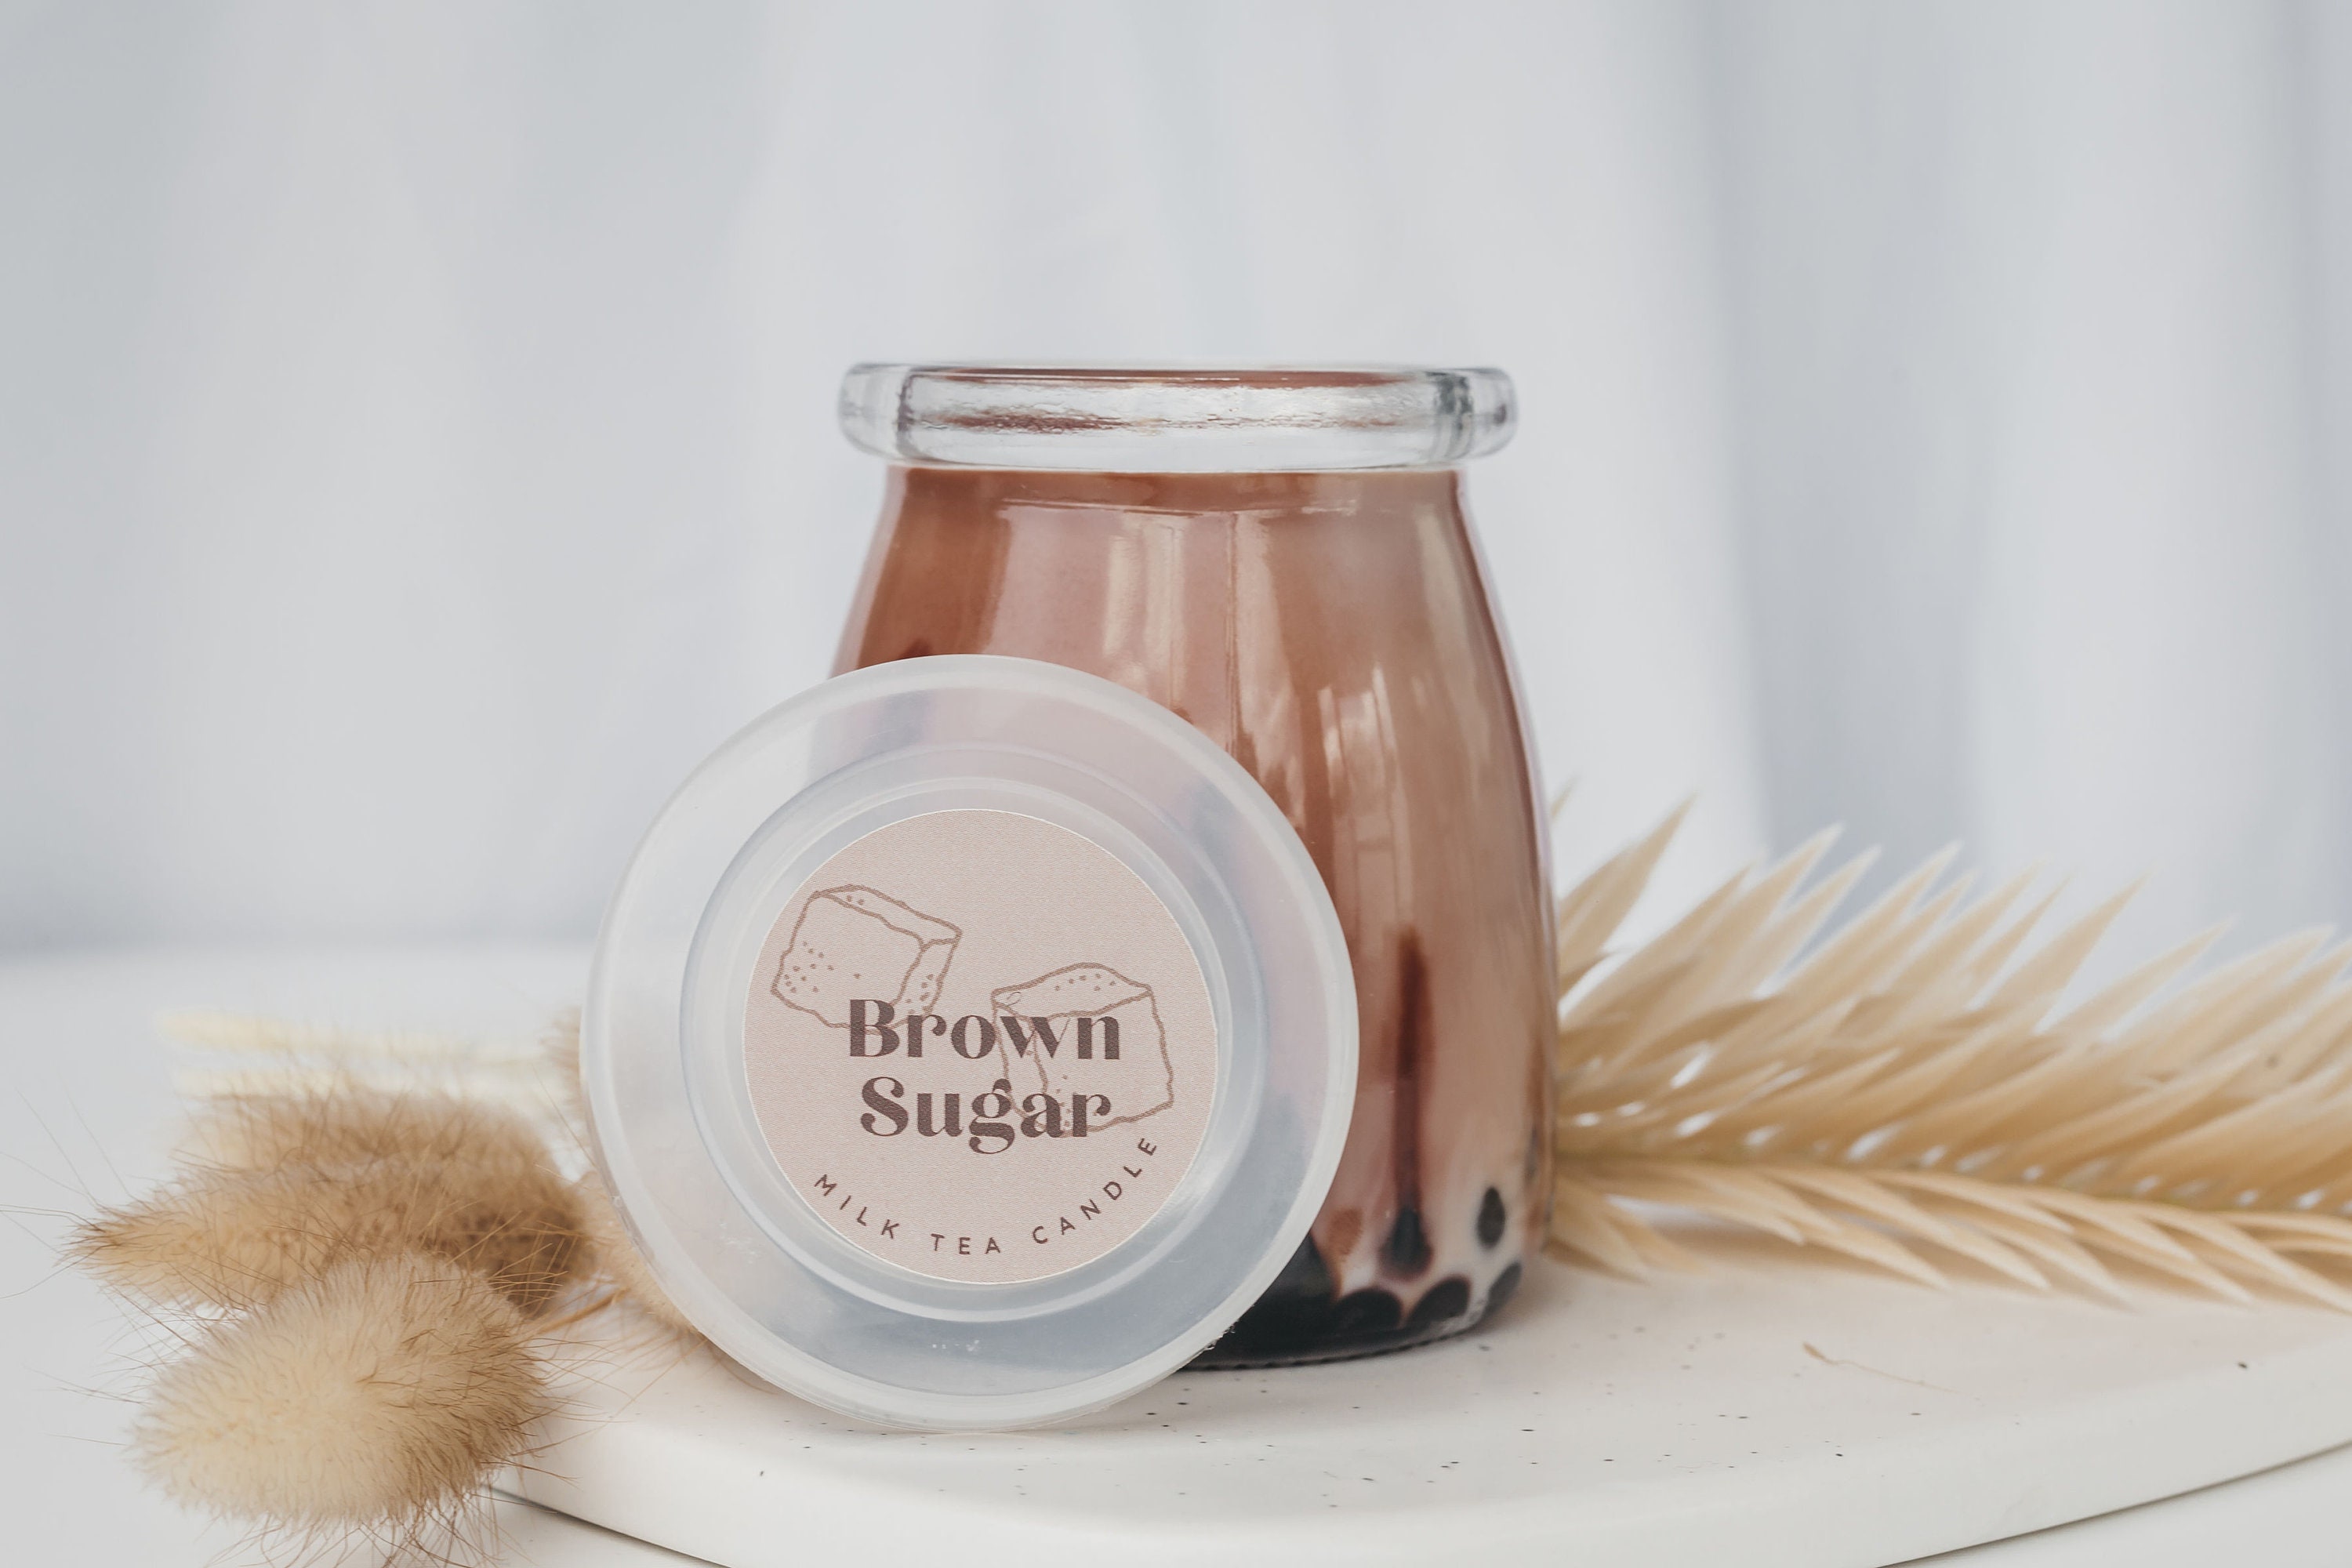 Brown Twine Brown and White Baker's Twine Light Brown Striped Twine Striped  Brown Sugar Divine Twine Cotton String Brown Gift Wrap 